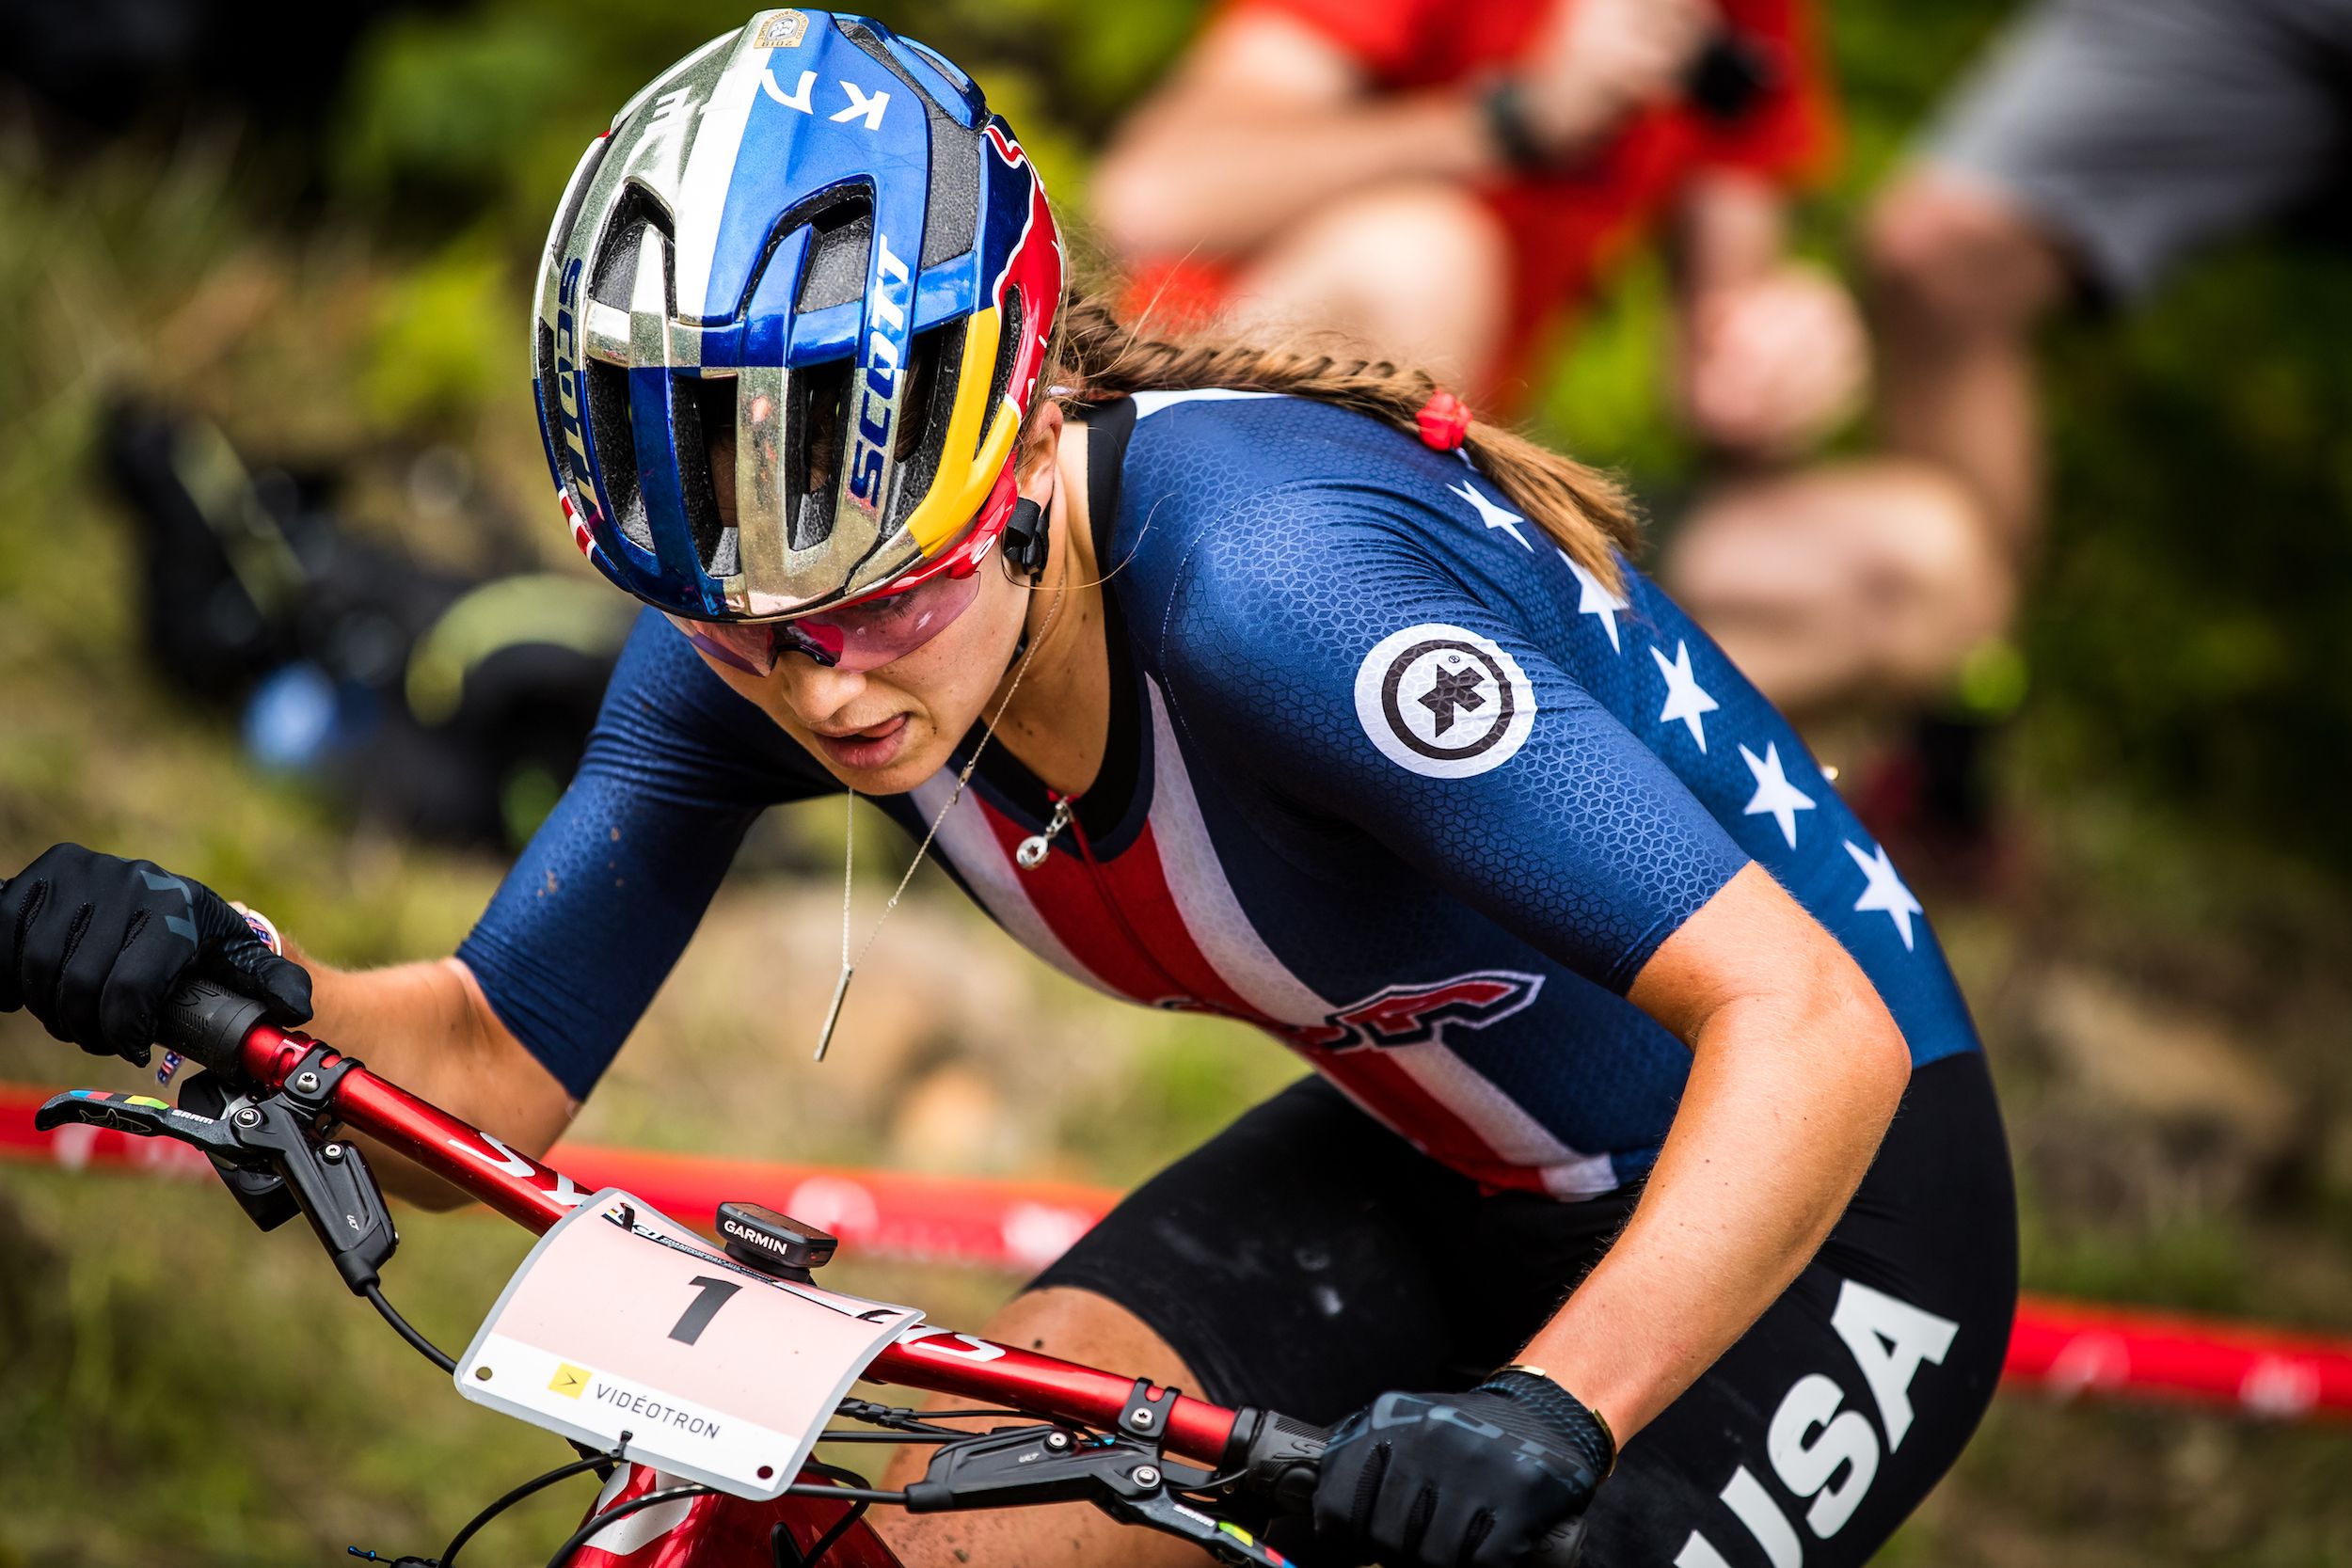 Kate Courtney Olympics - Mountain Bike Cup Overall Winner